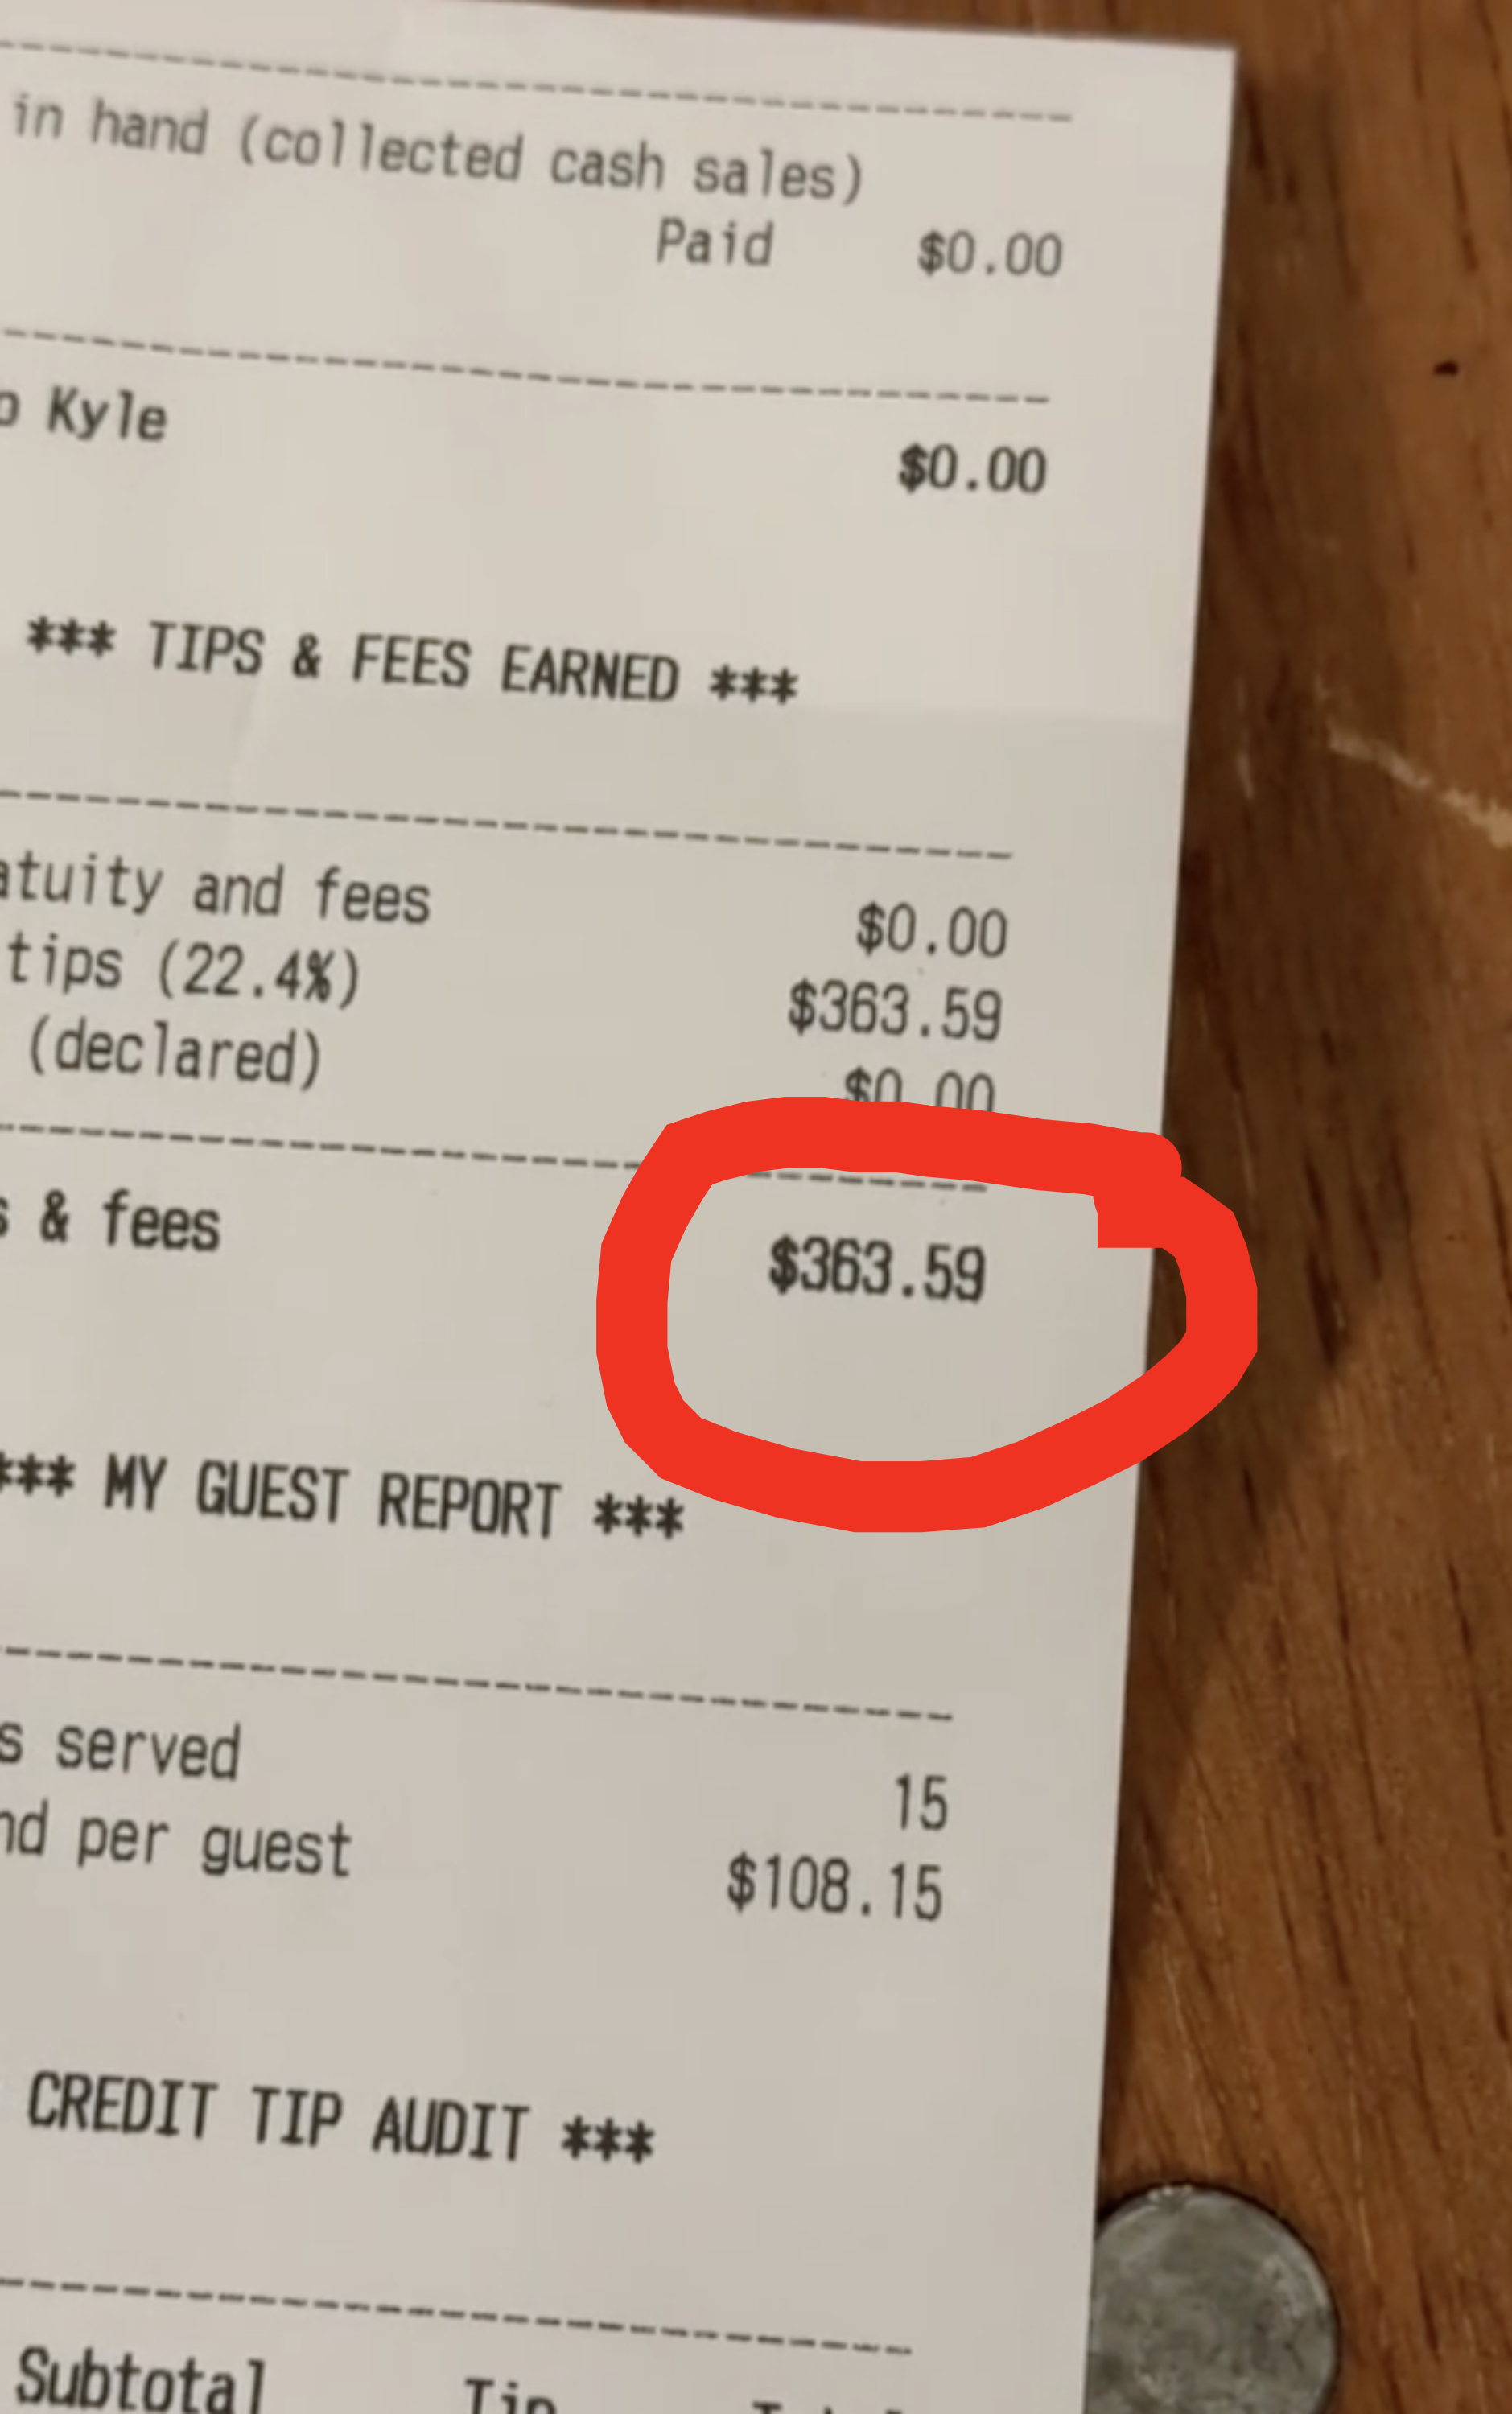 Receipt showing a total of $60.50 with a section titled &quot;TIPS &amp;amp; FEES EARNED&quot; displaying zero dollars earned